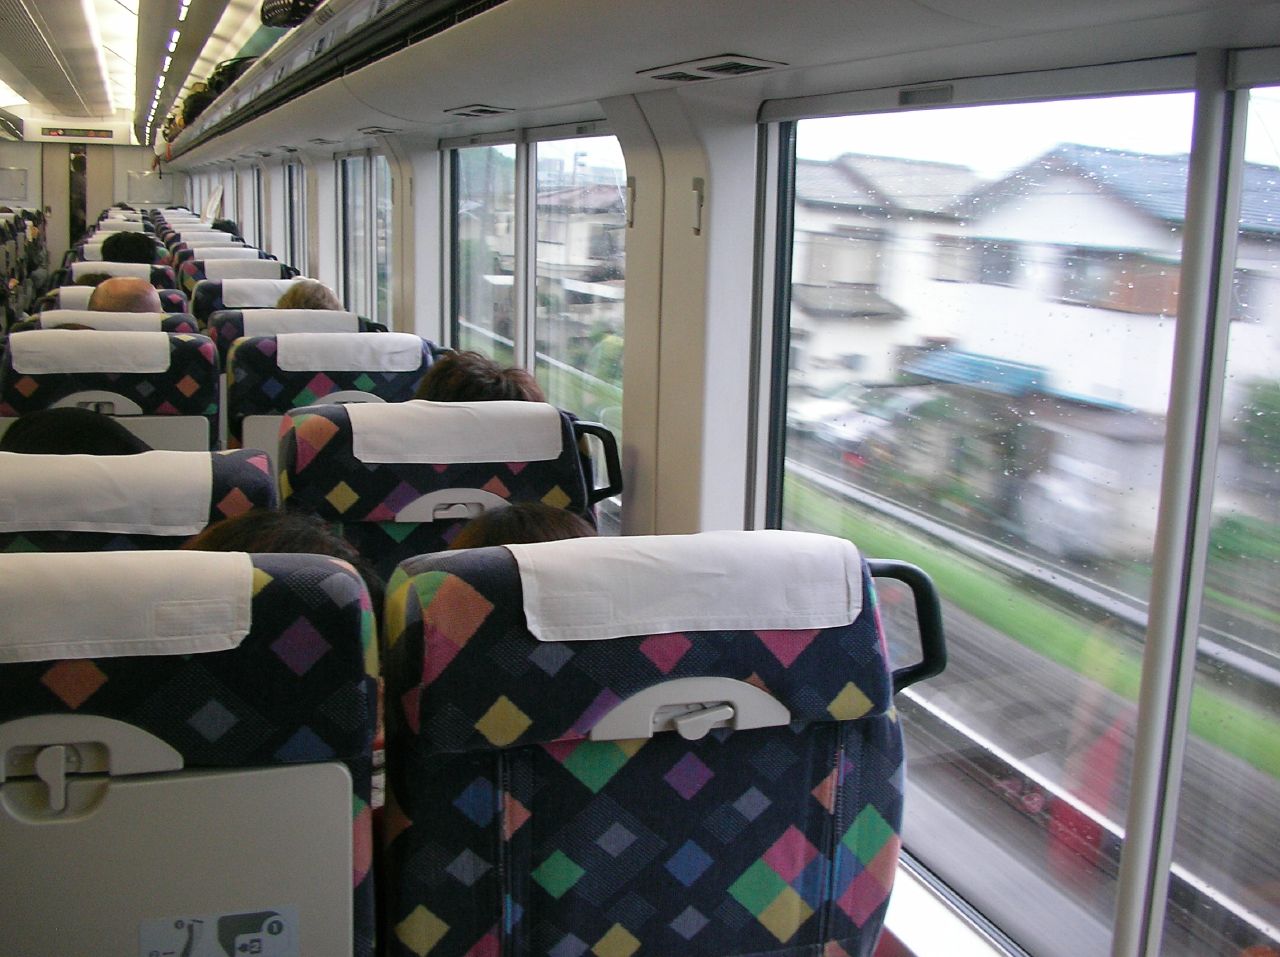 rows of seats in the passenger compartment of an empty train